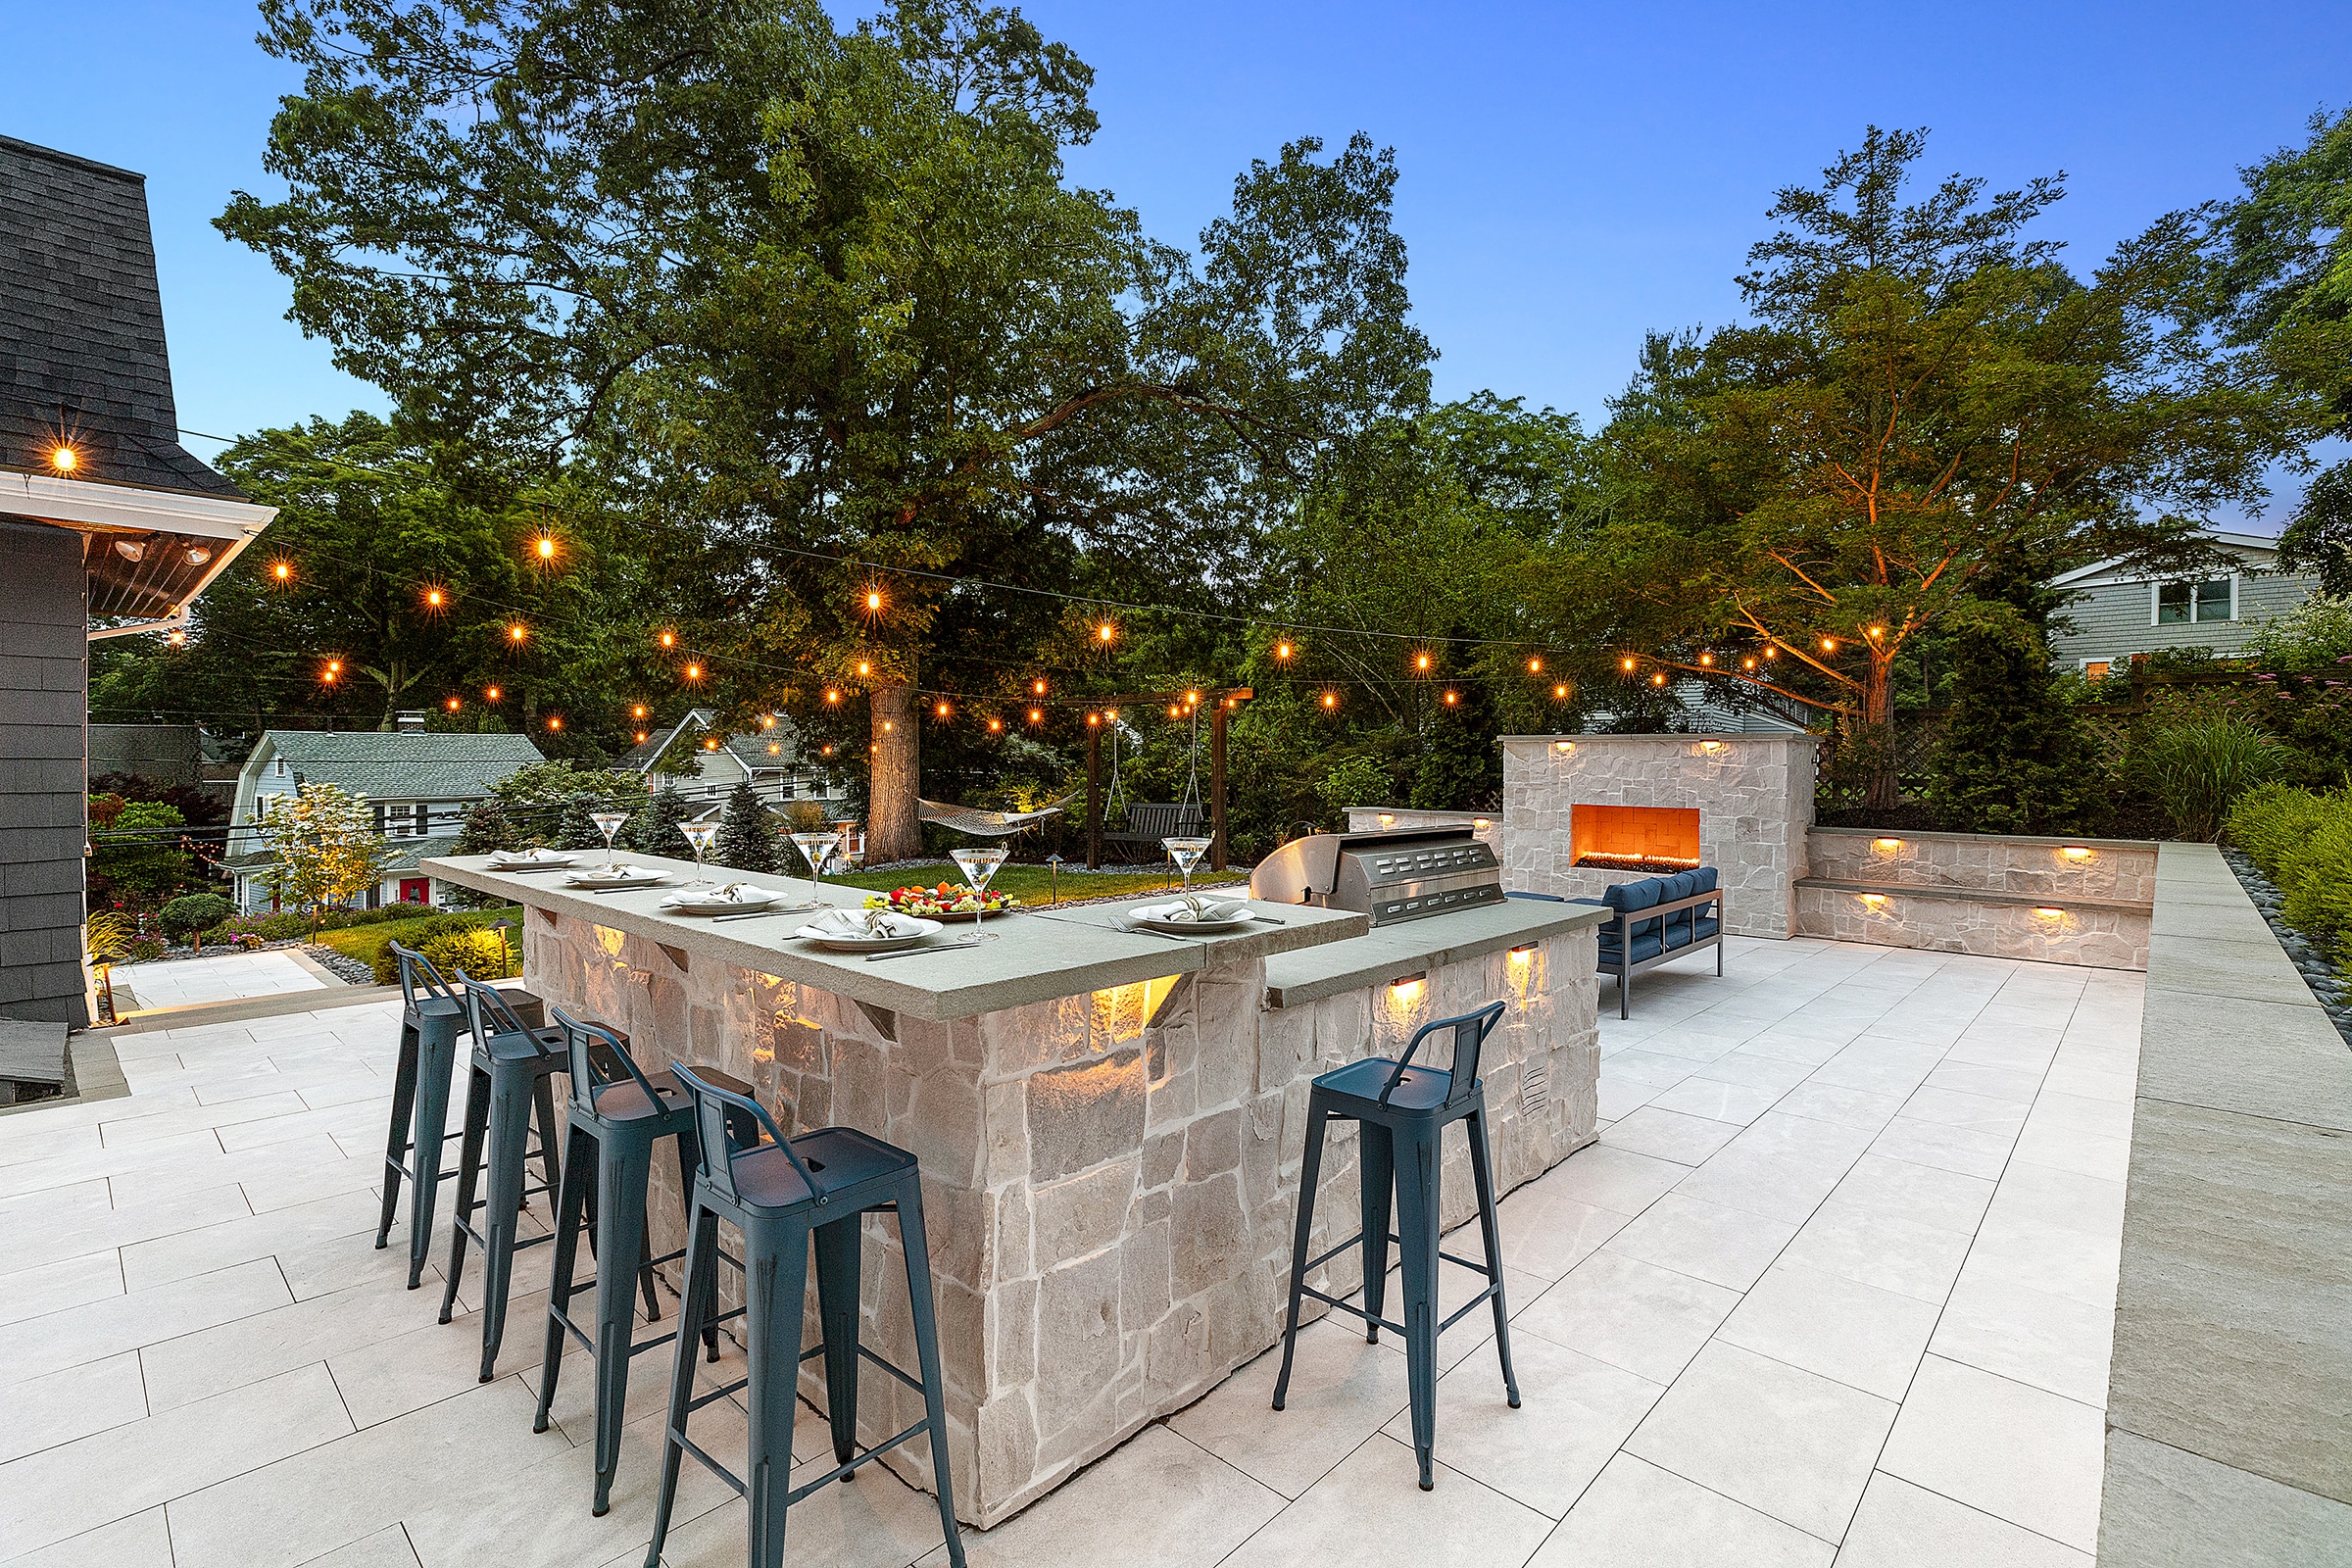 Place settings and barstools are at the ready by the outdoor bar and outdoor kitchen on the Needham, MA backyard patio.